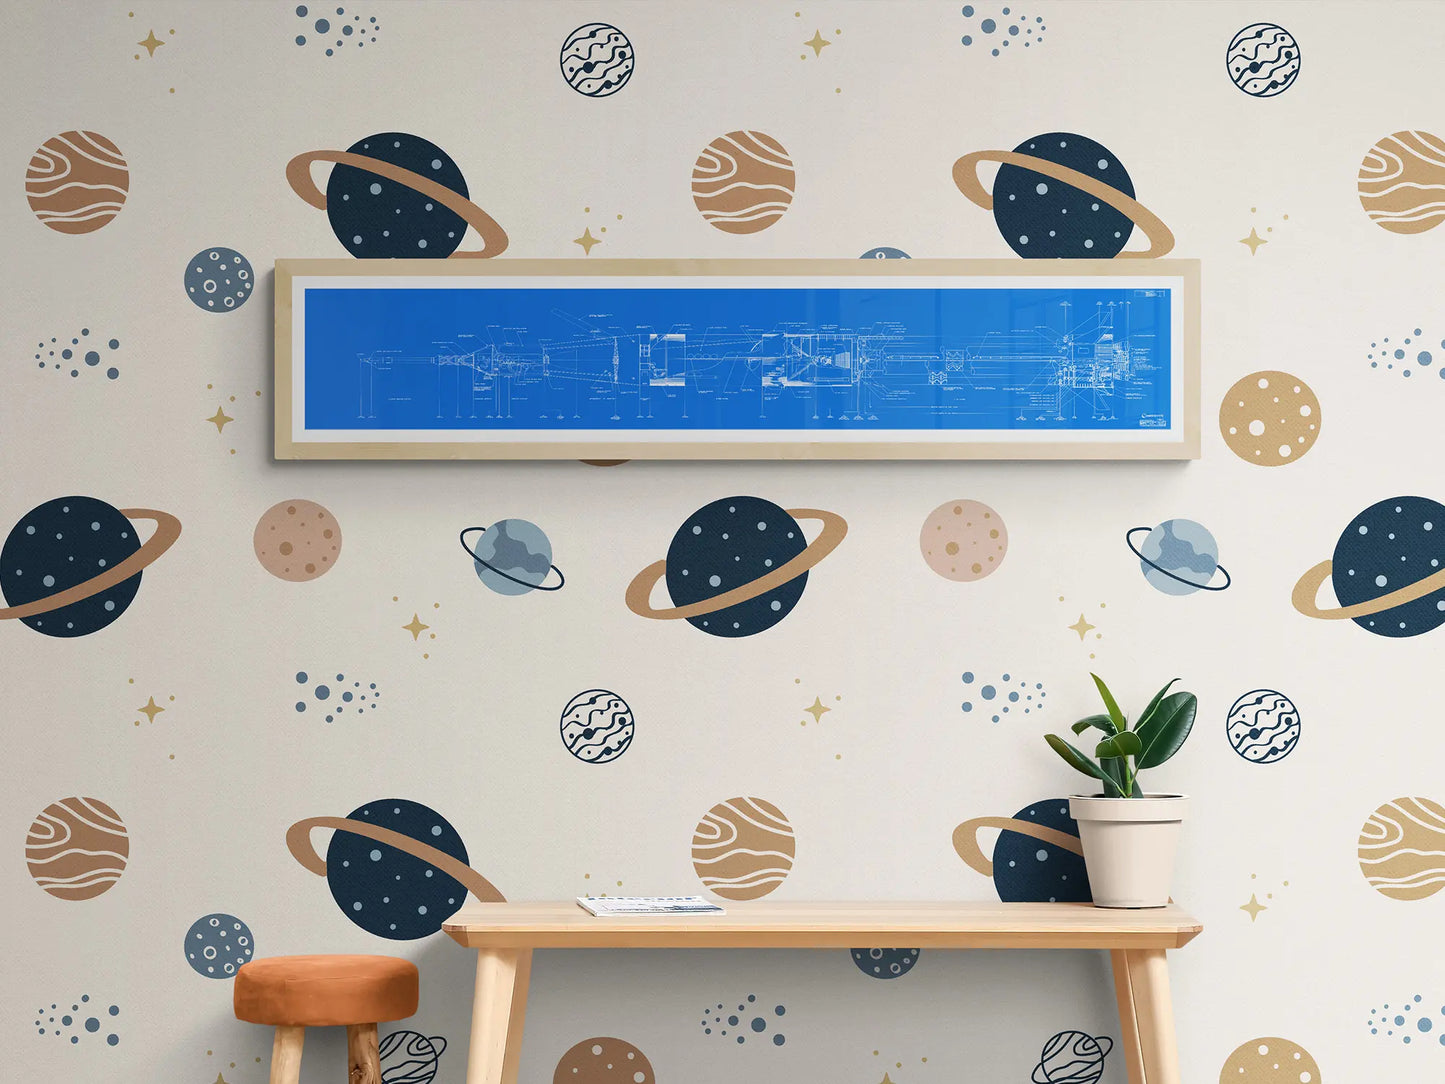 Apollo Saturn Blueprint | NASA posters | Technical blueprint diagram of an spacecraft | A bright blue-framed blueprint of the Saturn IB rocket is displayed on a wall with a space-themed wallpaper, featuring illustrations of planets, stars, and other celestial bodies. Below, a wooden table with a small potted plant and an orange cushioned stool complete the scene.